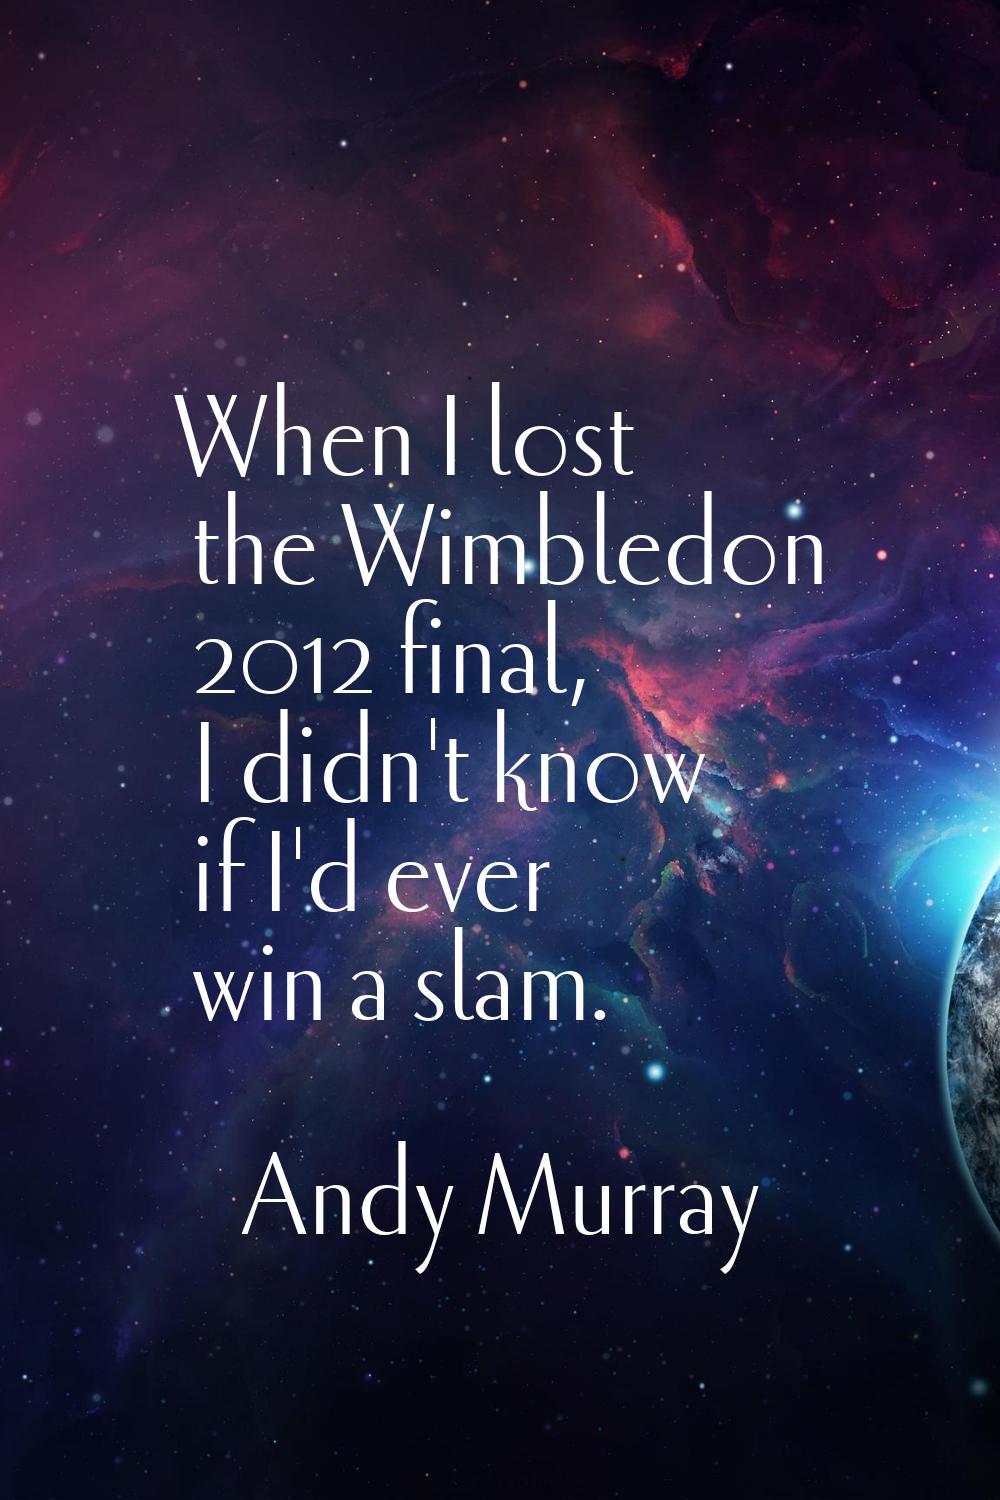 When I lost the Wimbledon 2012 final, I didn't know if I'd ever win a slam.